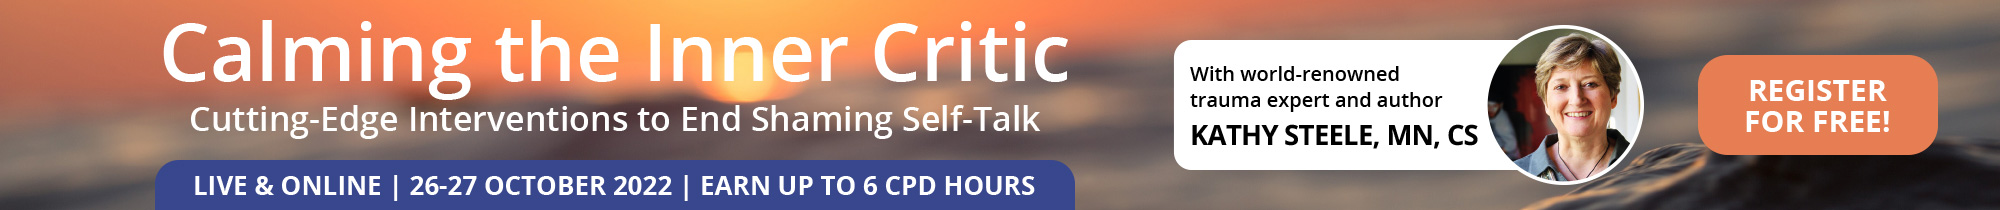 Calming the Inner Critic: Cutting-Edge Interventions To End Shaming Self-Talk 